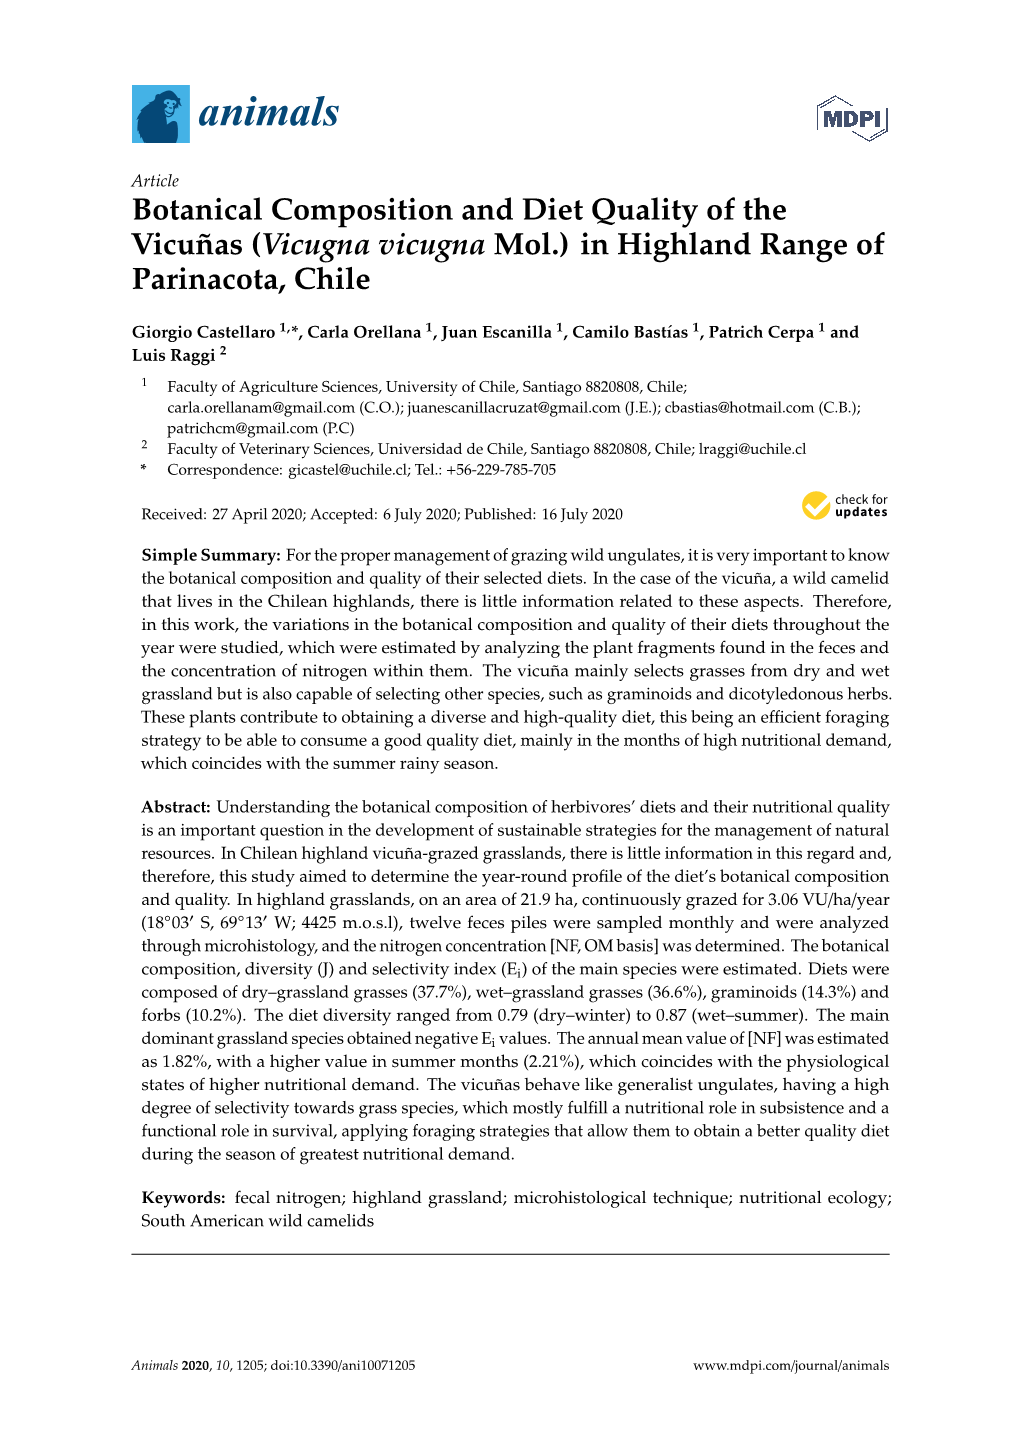 Botanical Composition and Diet Quality of the Vicuñas (Vicugna Vicugna Mol.) in Highland Range of Parinacota, Chile